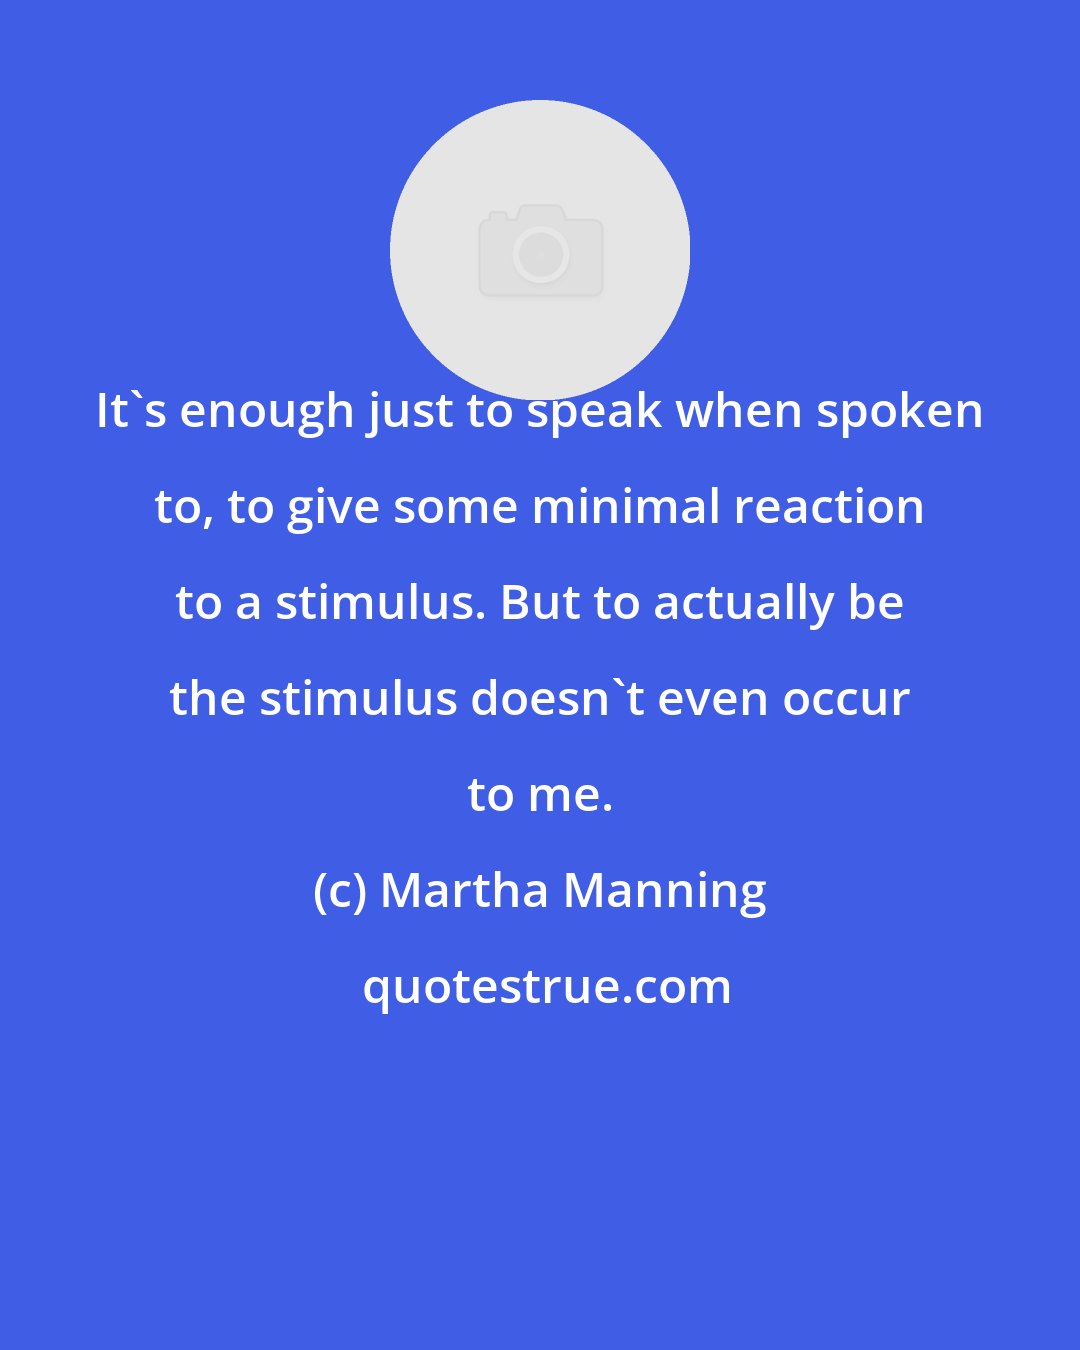 Martha Manning: It's enough just to speak when spoken to, to give some minimal reaction to a stimulus. But to actually be the stimulus doesn't even occur to me.